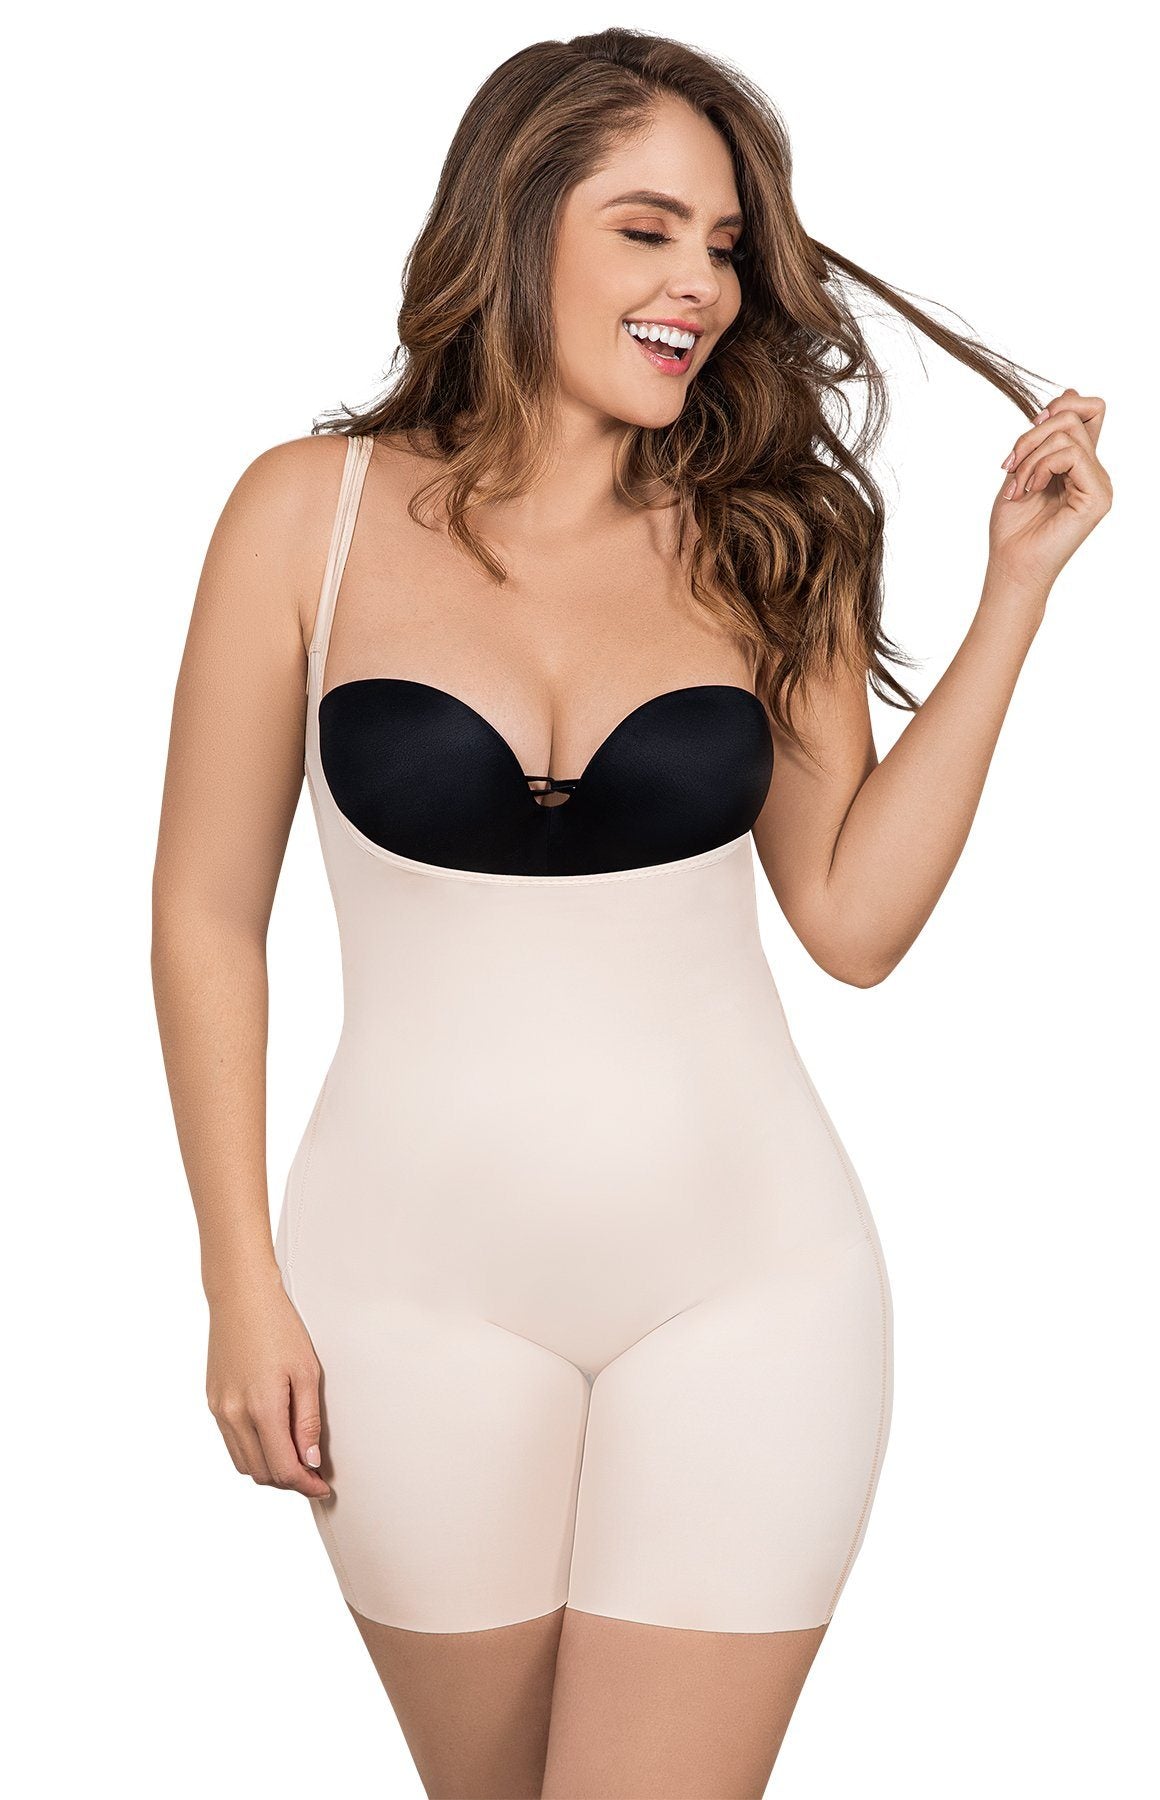 Golden Curves Seamless Full Body Shaper (Crotchless) – goldencurves